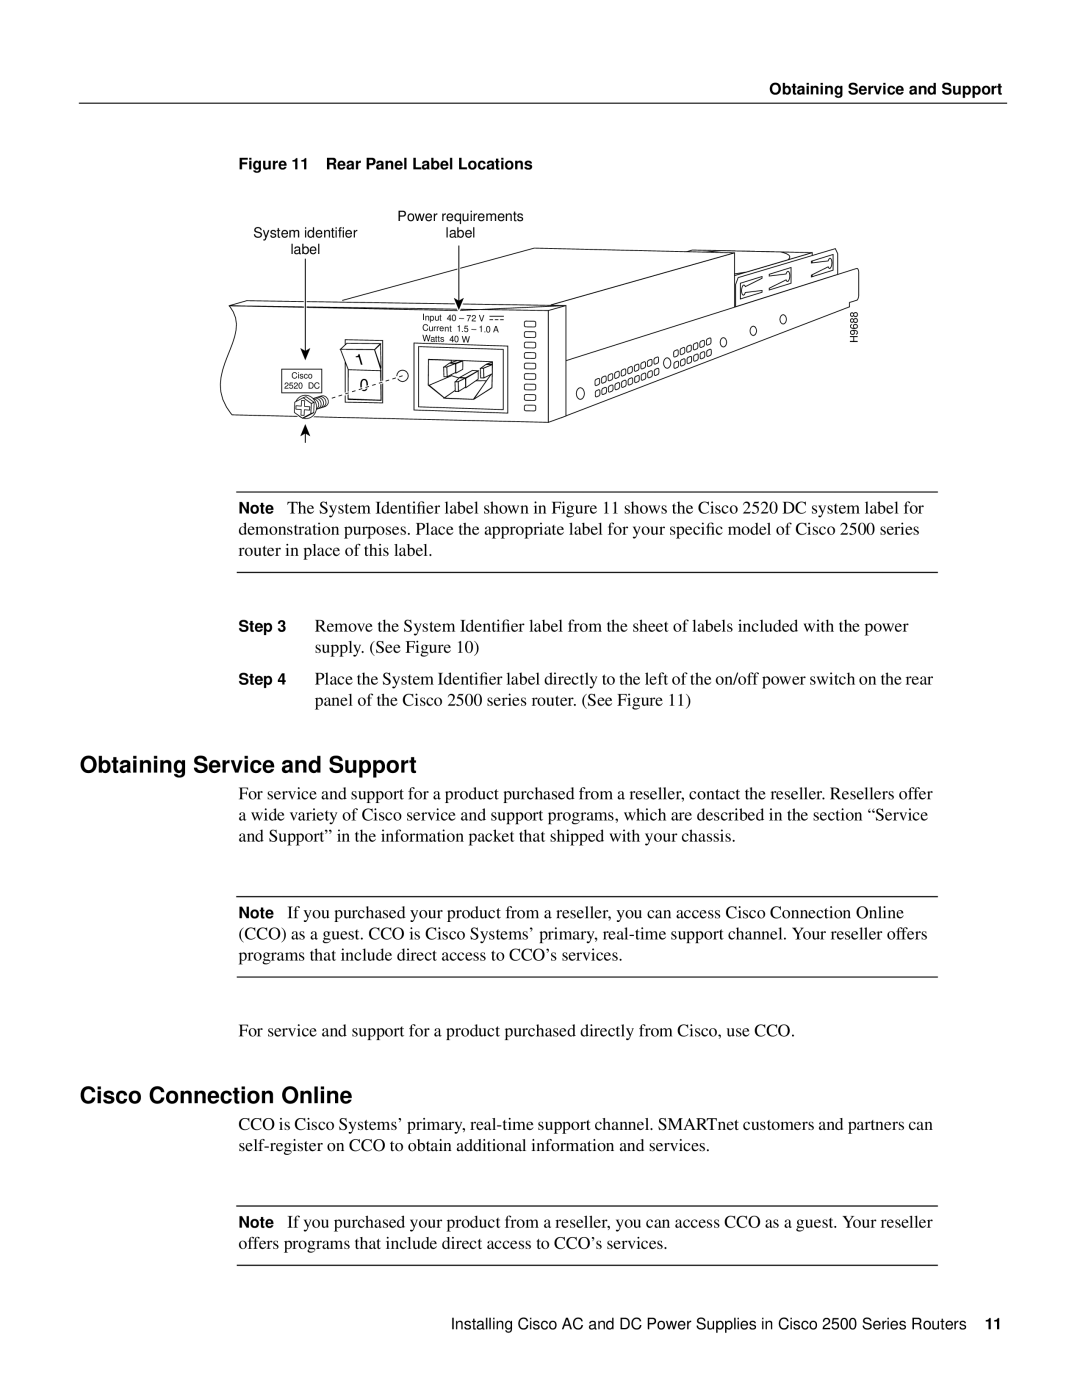 Cisco Systems 2500 Series manual Obtaining Service and Support, Cisco Connection Online, Rear Panel Label Locations 